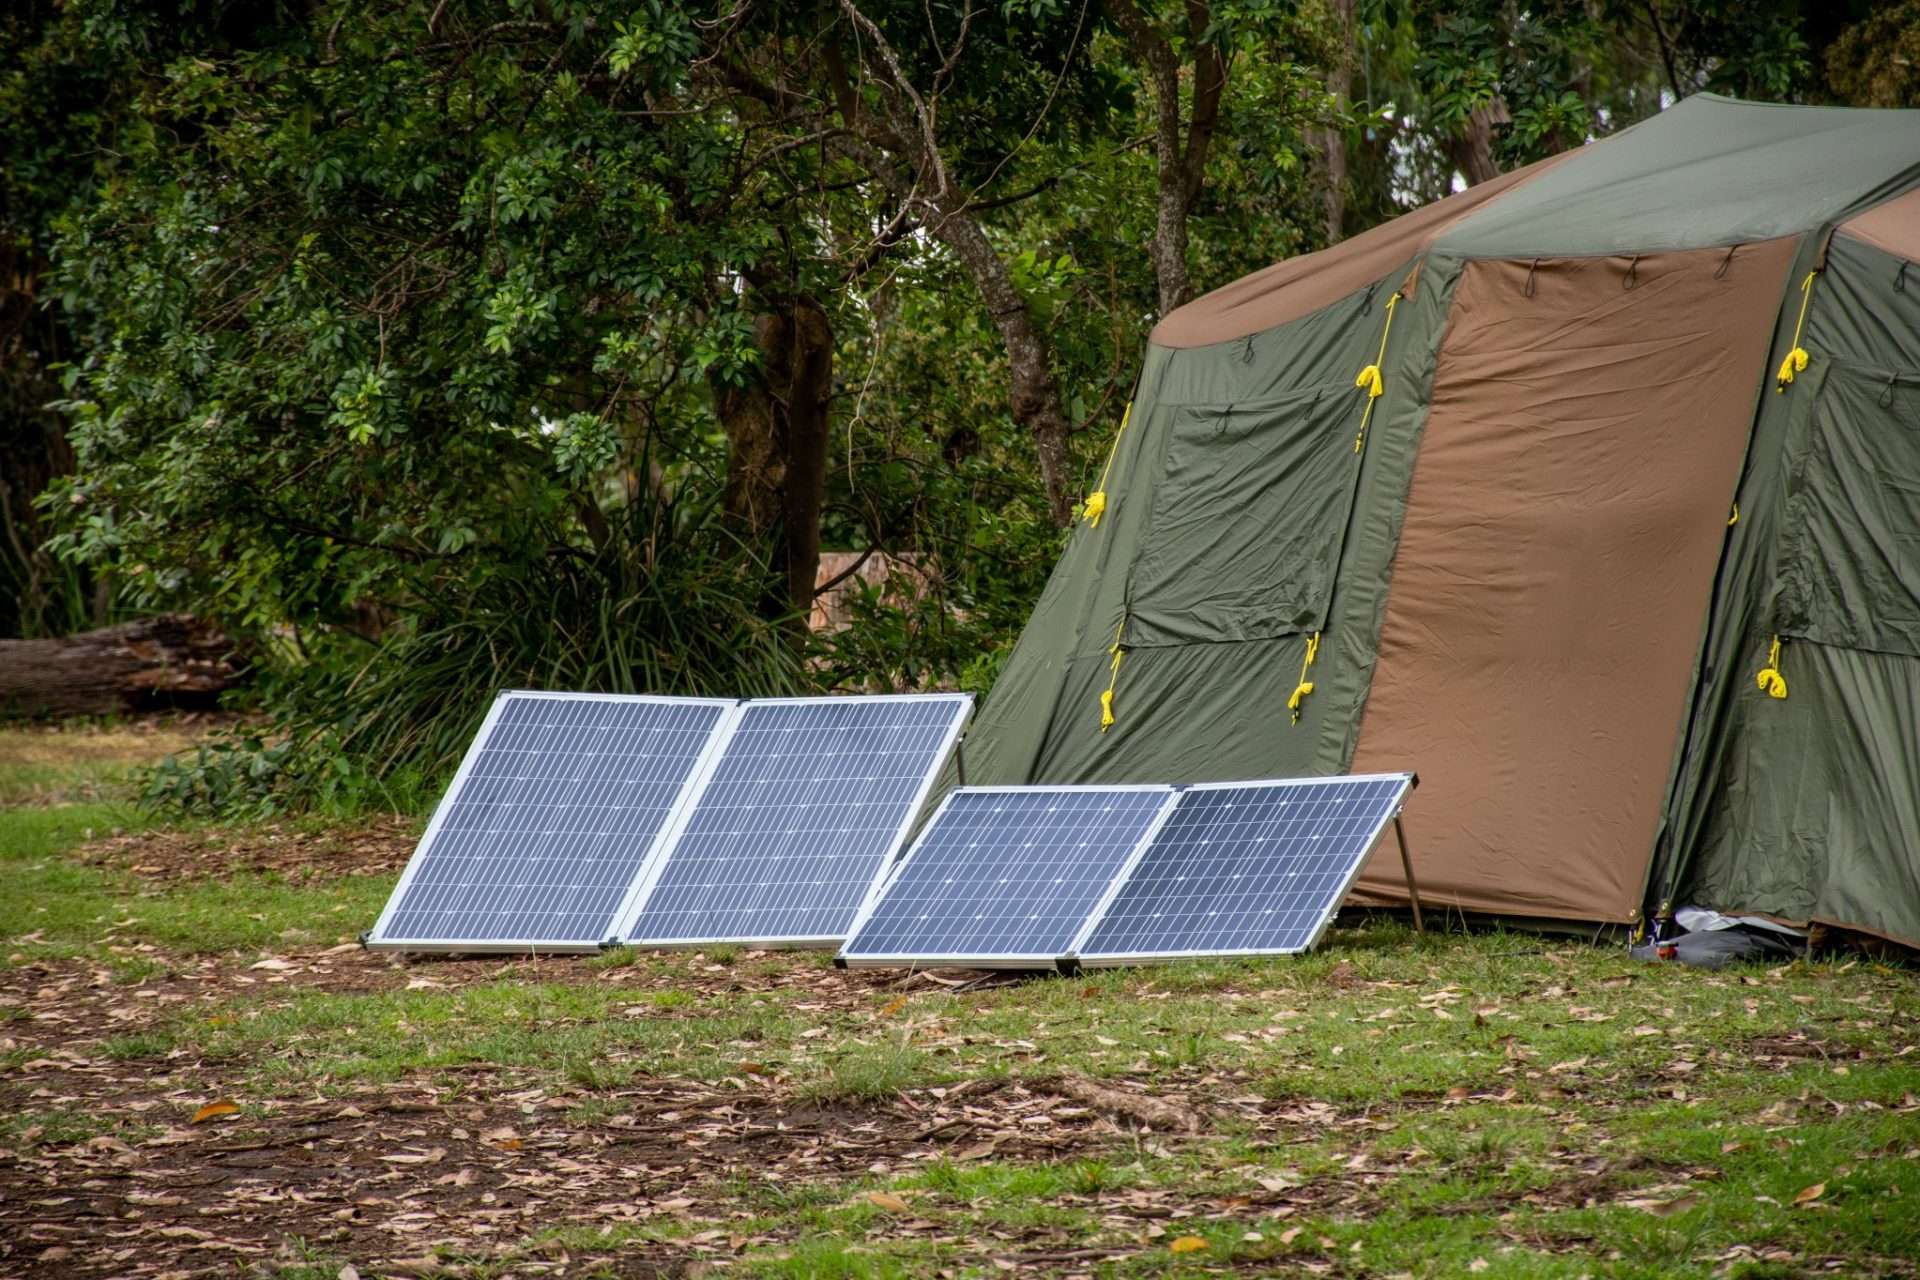 Portable solar panels set up in front of tent